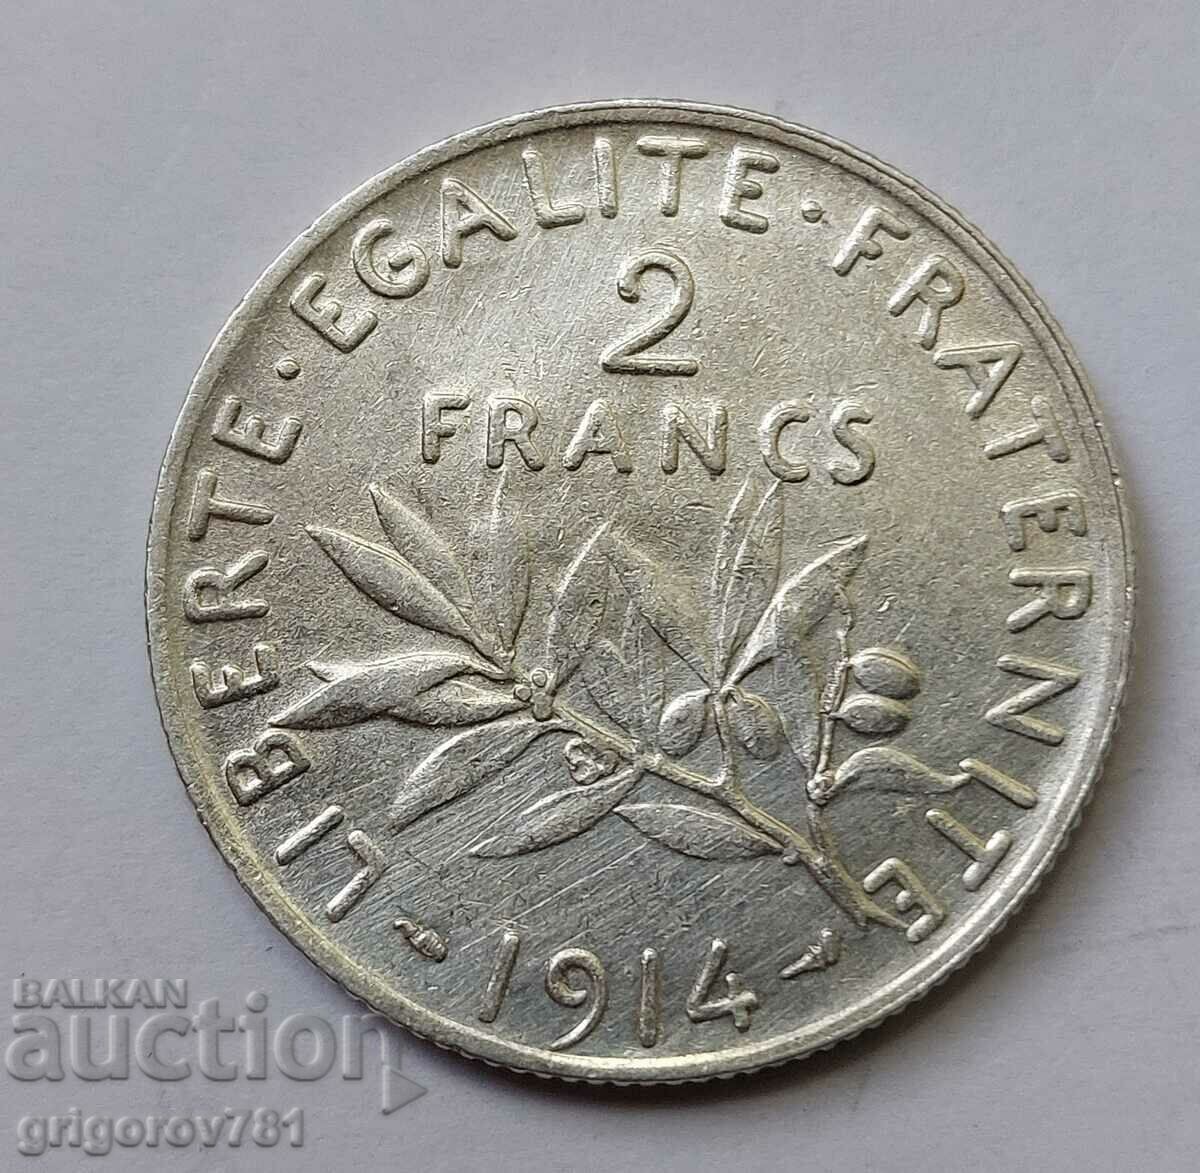 2 Francs Silver France 1914 - Silver Coin #110